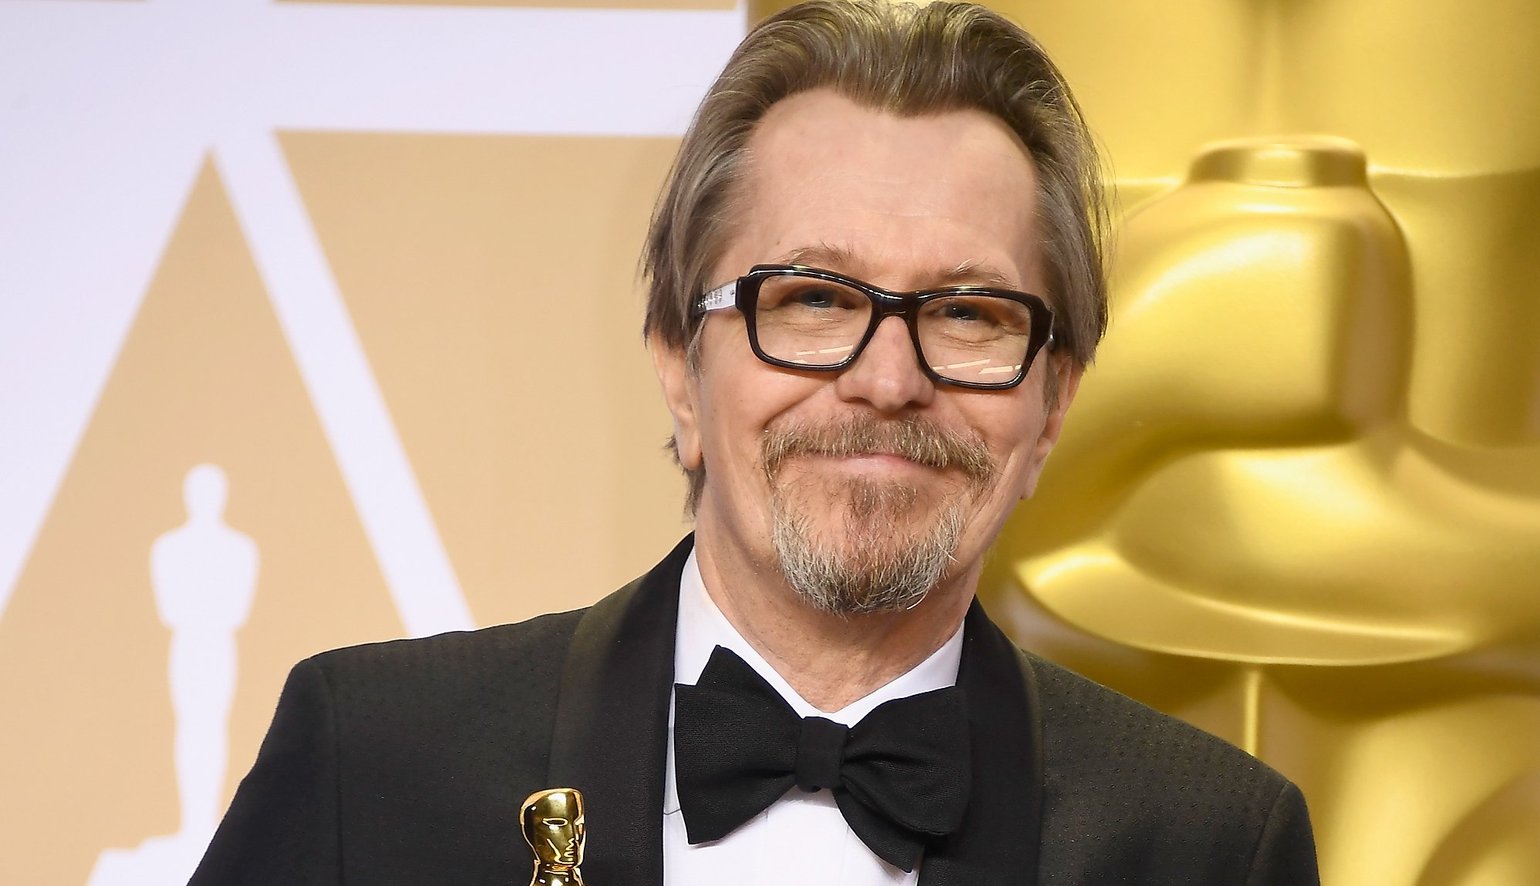 Gary Oldman became tearful during his acceptance speech